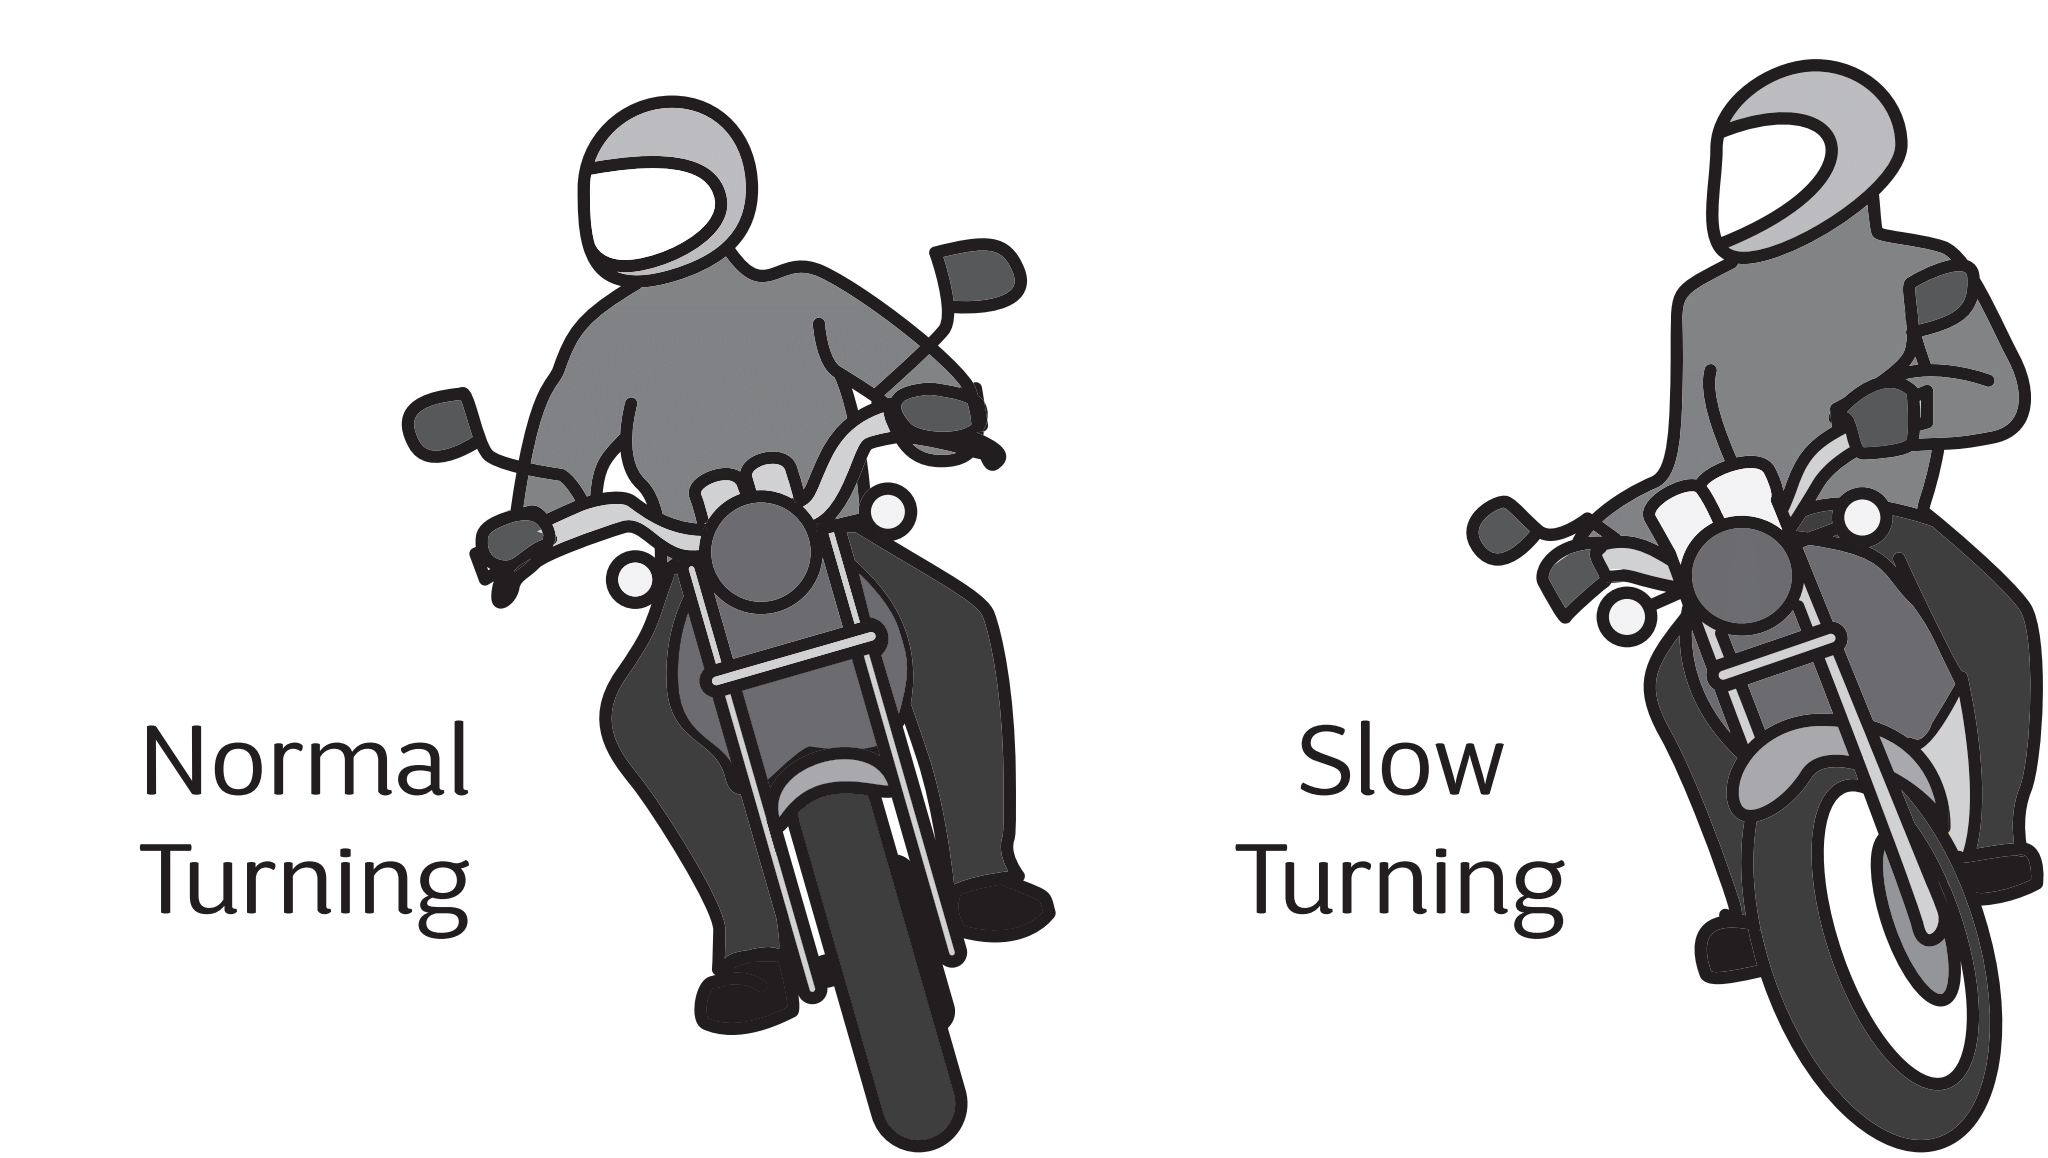 image of turning on a motorcycle